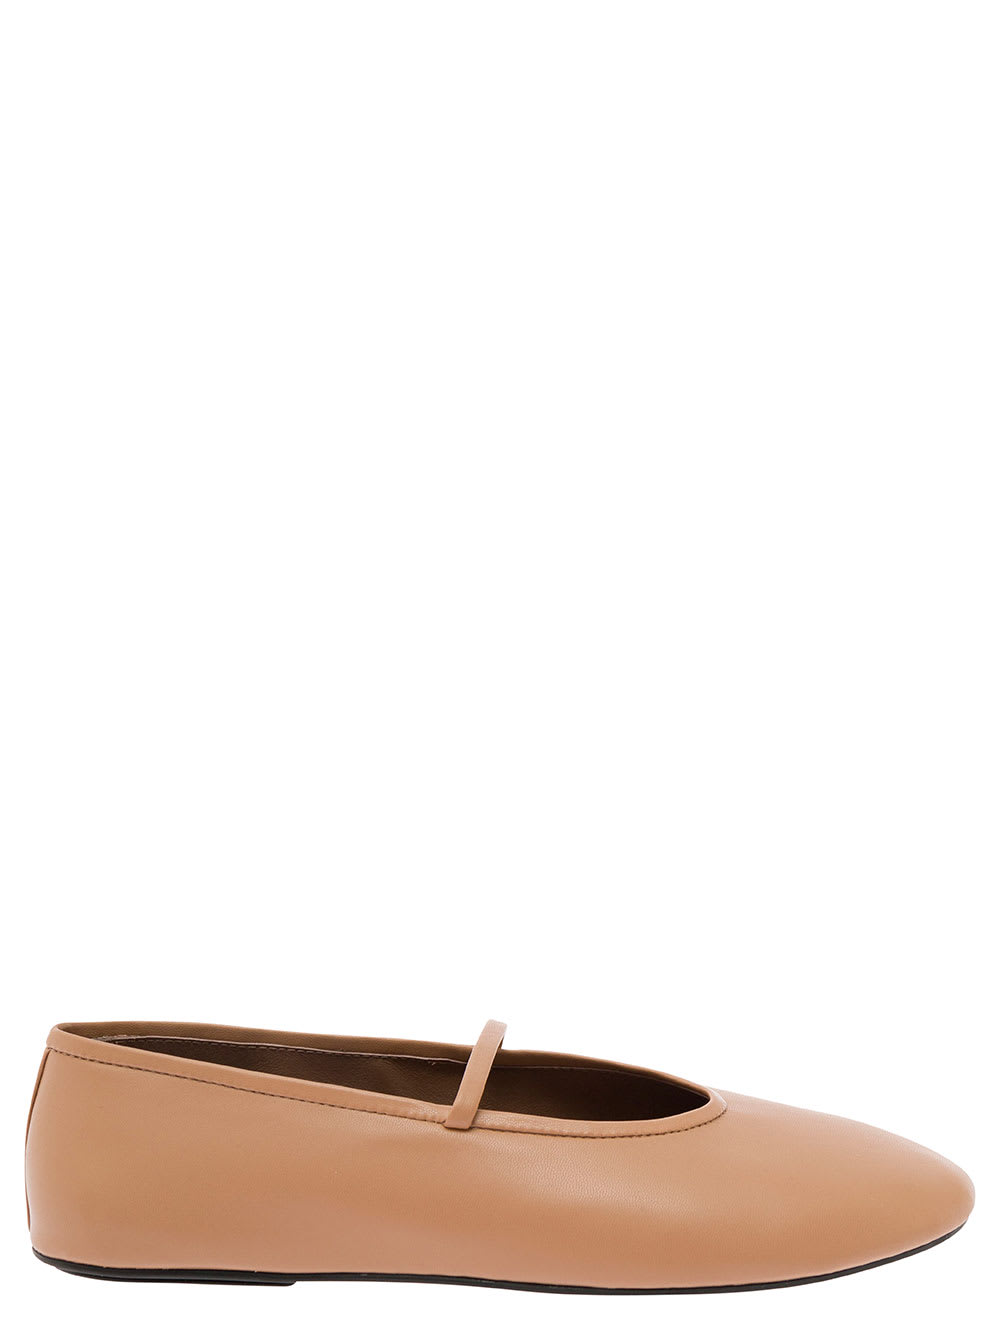 Beige Ballet Flats With Almond Toe In Eco Leather Woman